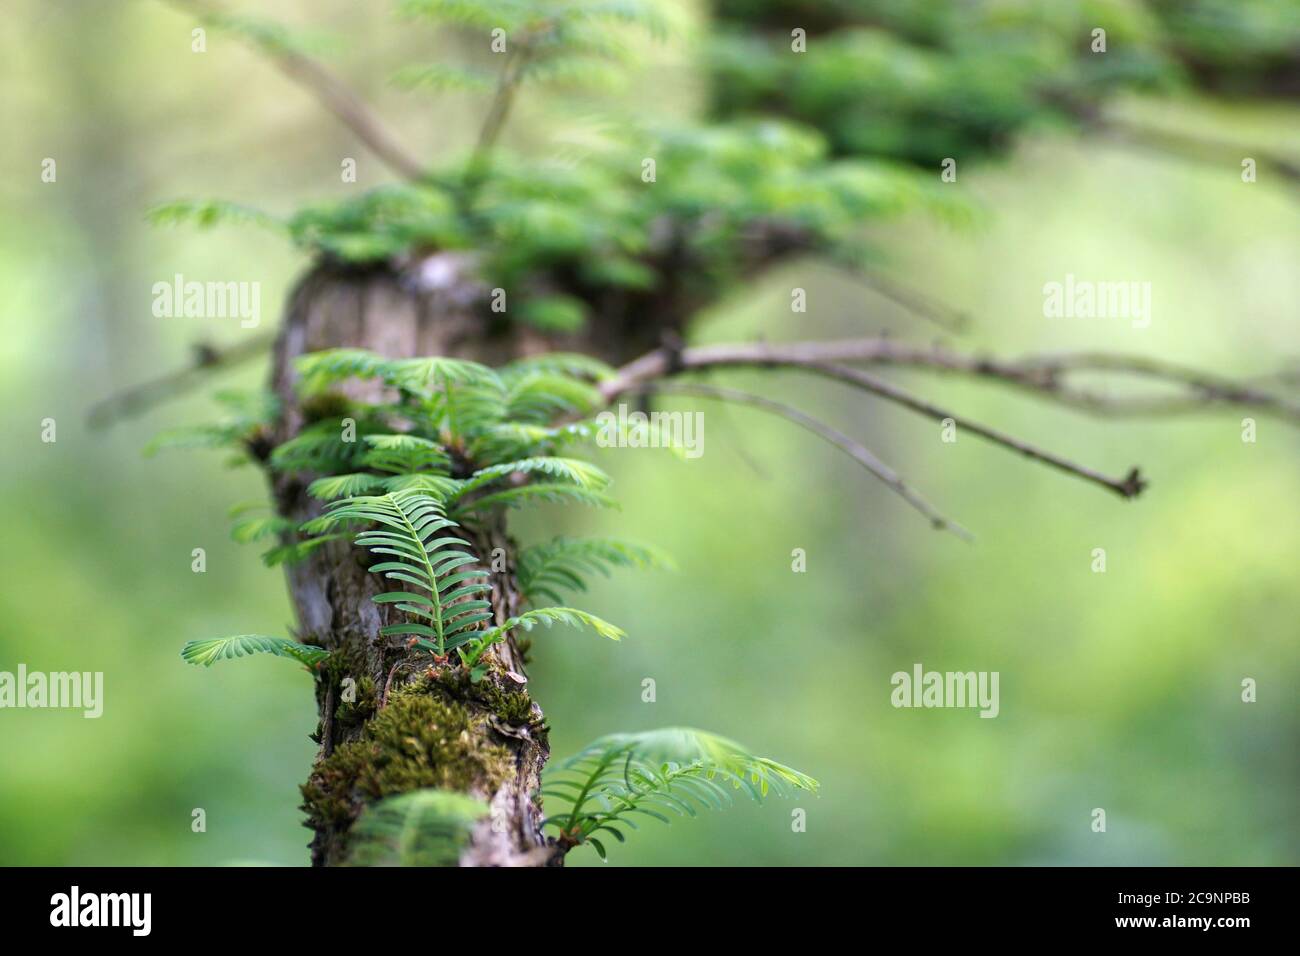 May in the arboretum, young leaves on a metasequoia branch, fuzzy background and copy space Stock Photo